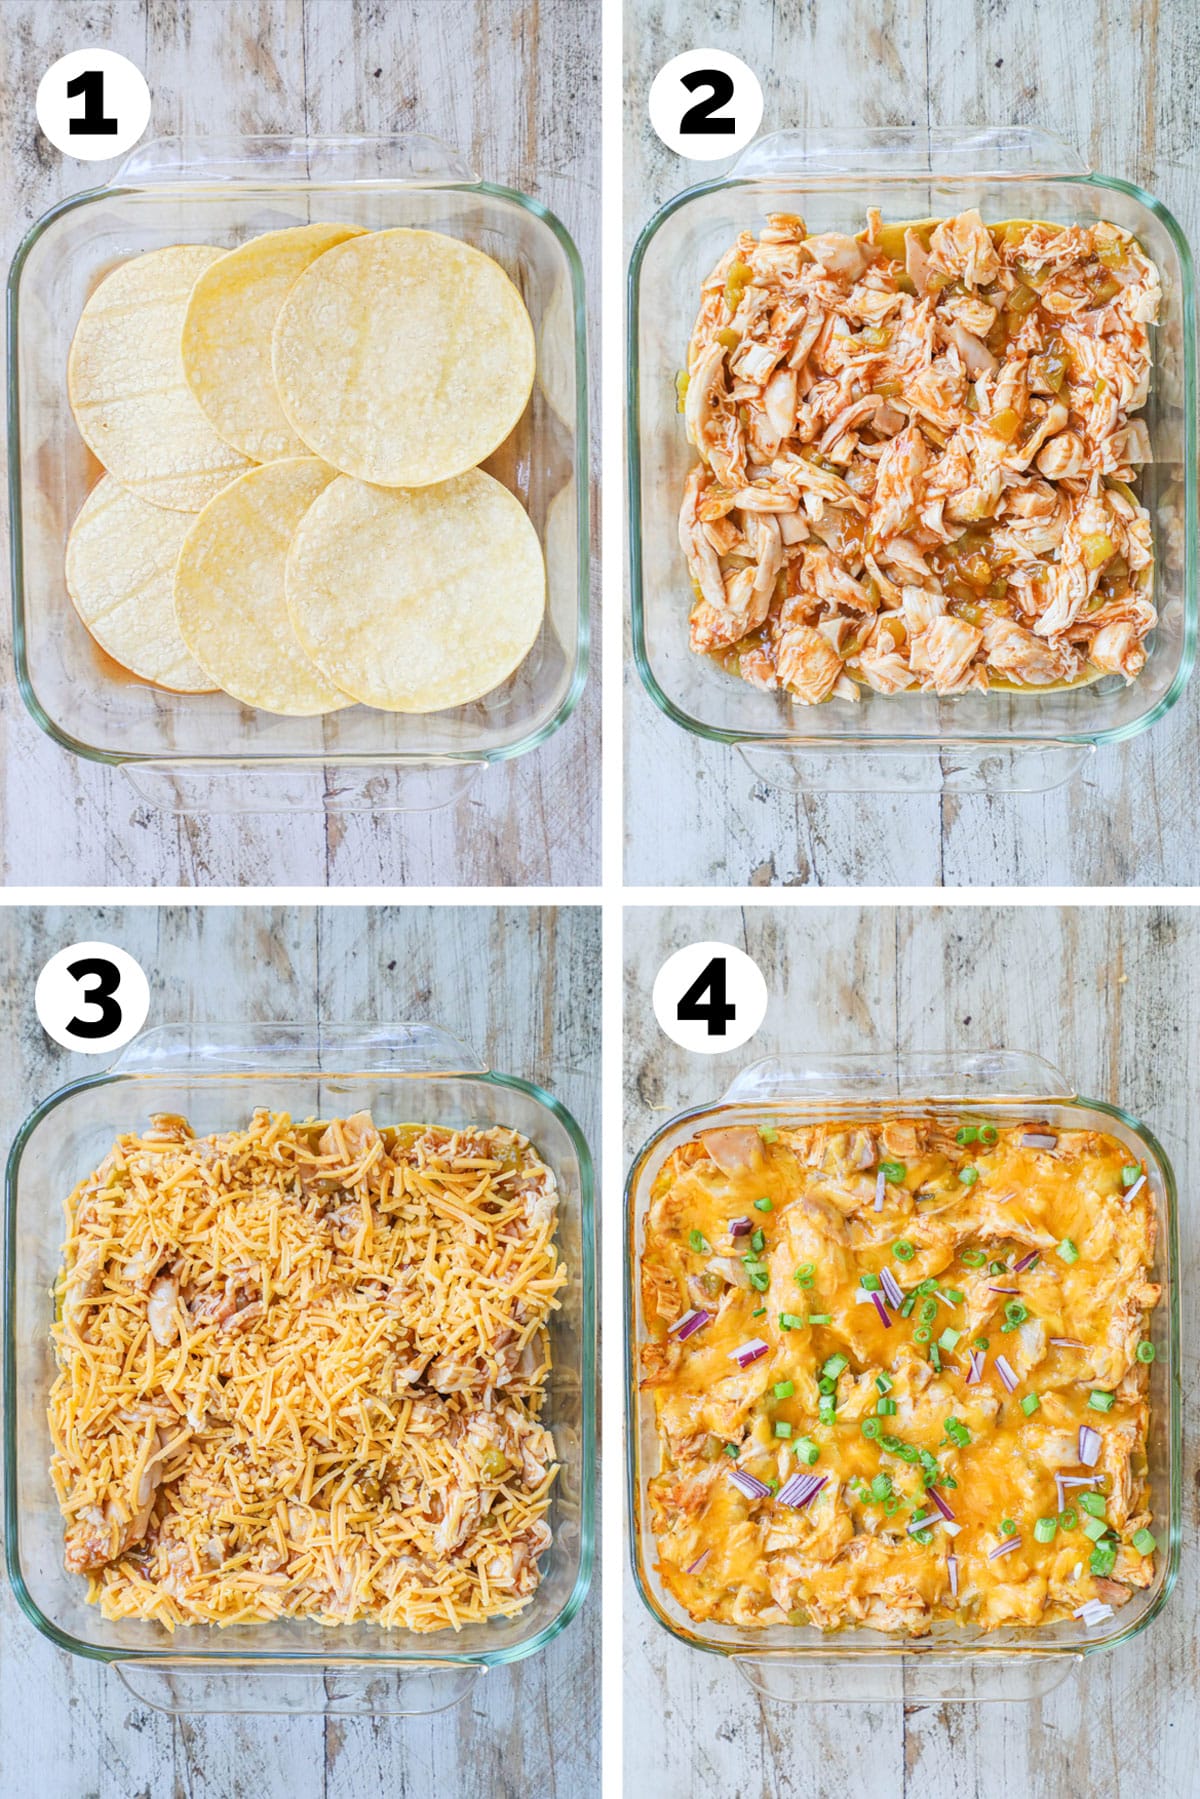 Process photos for how to make chicken enchilada casserole: 1. Place tortillas on bottom of casserole dish. 2. Chicken mixed with enchilada sauce is layered on top. 3. Cheese is added and layers are repeated. 4. Bake and garnish with green onions.